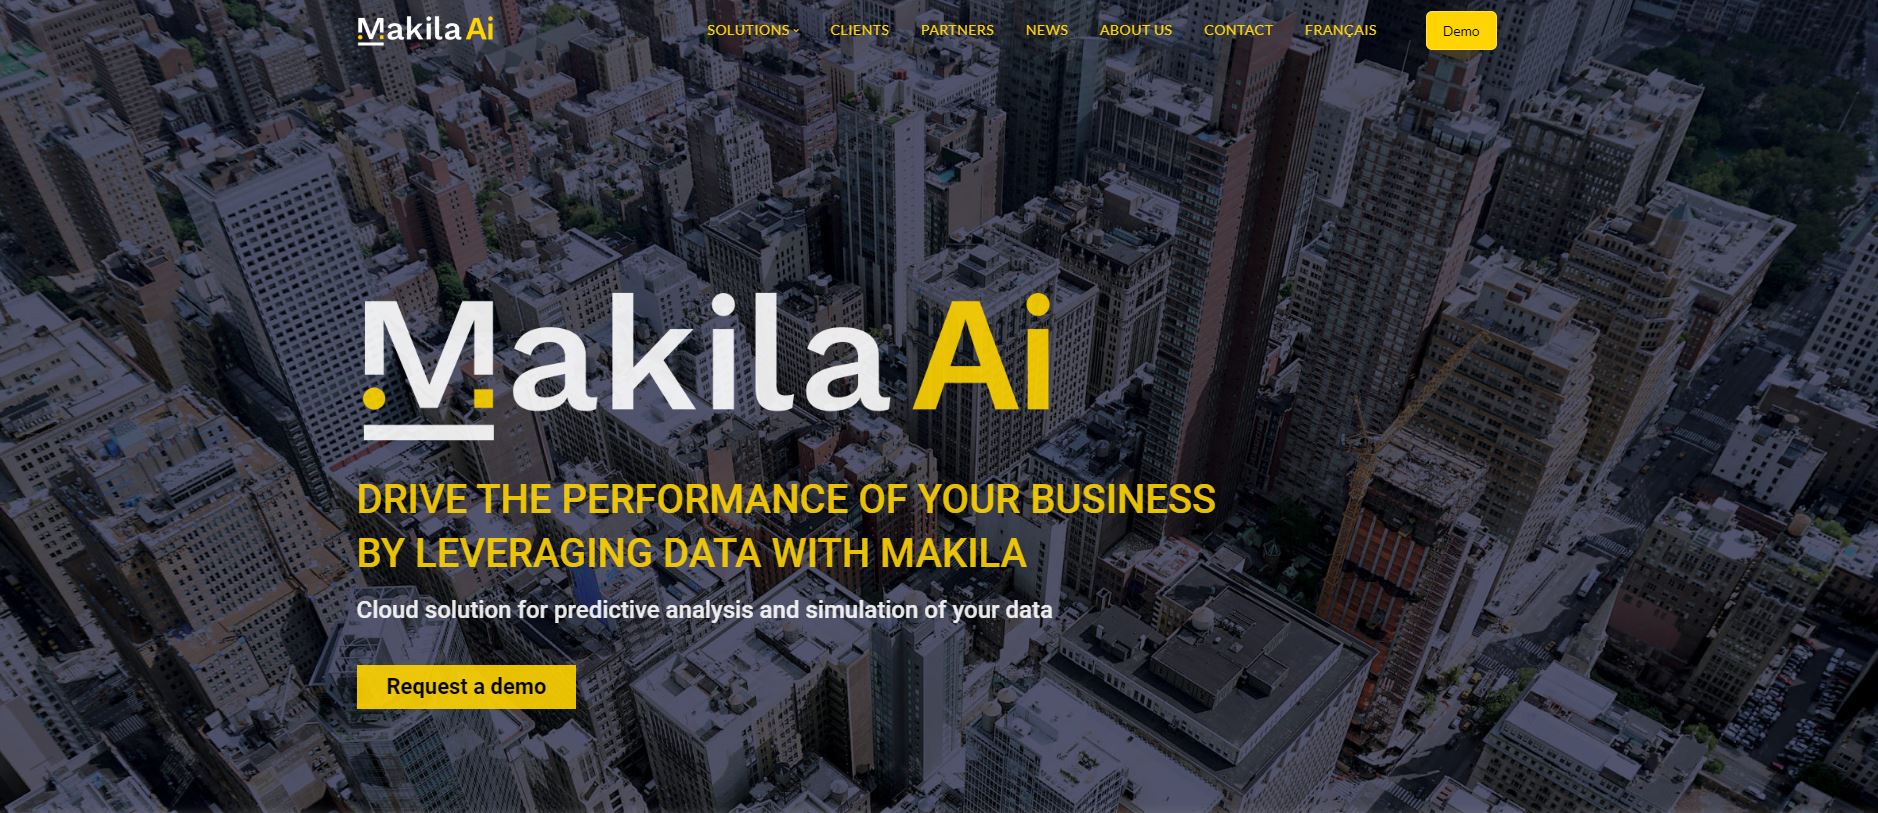 Makila’s platform offers automation for financial modeling, which simplifies the preparation of budgets or forecasts with the help of predictive algorithms. 